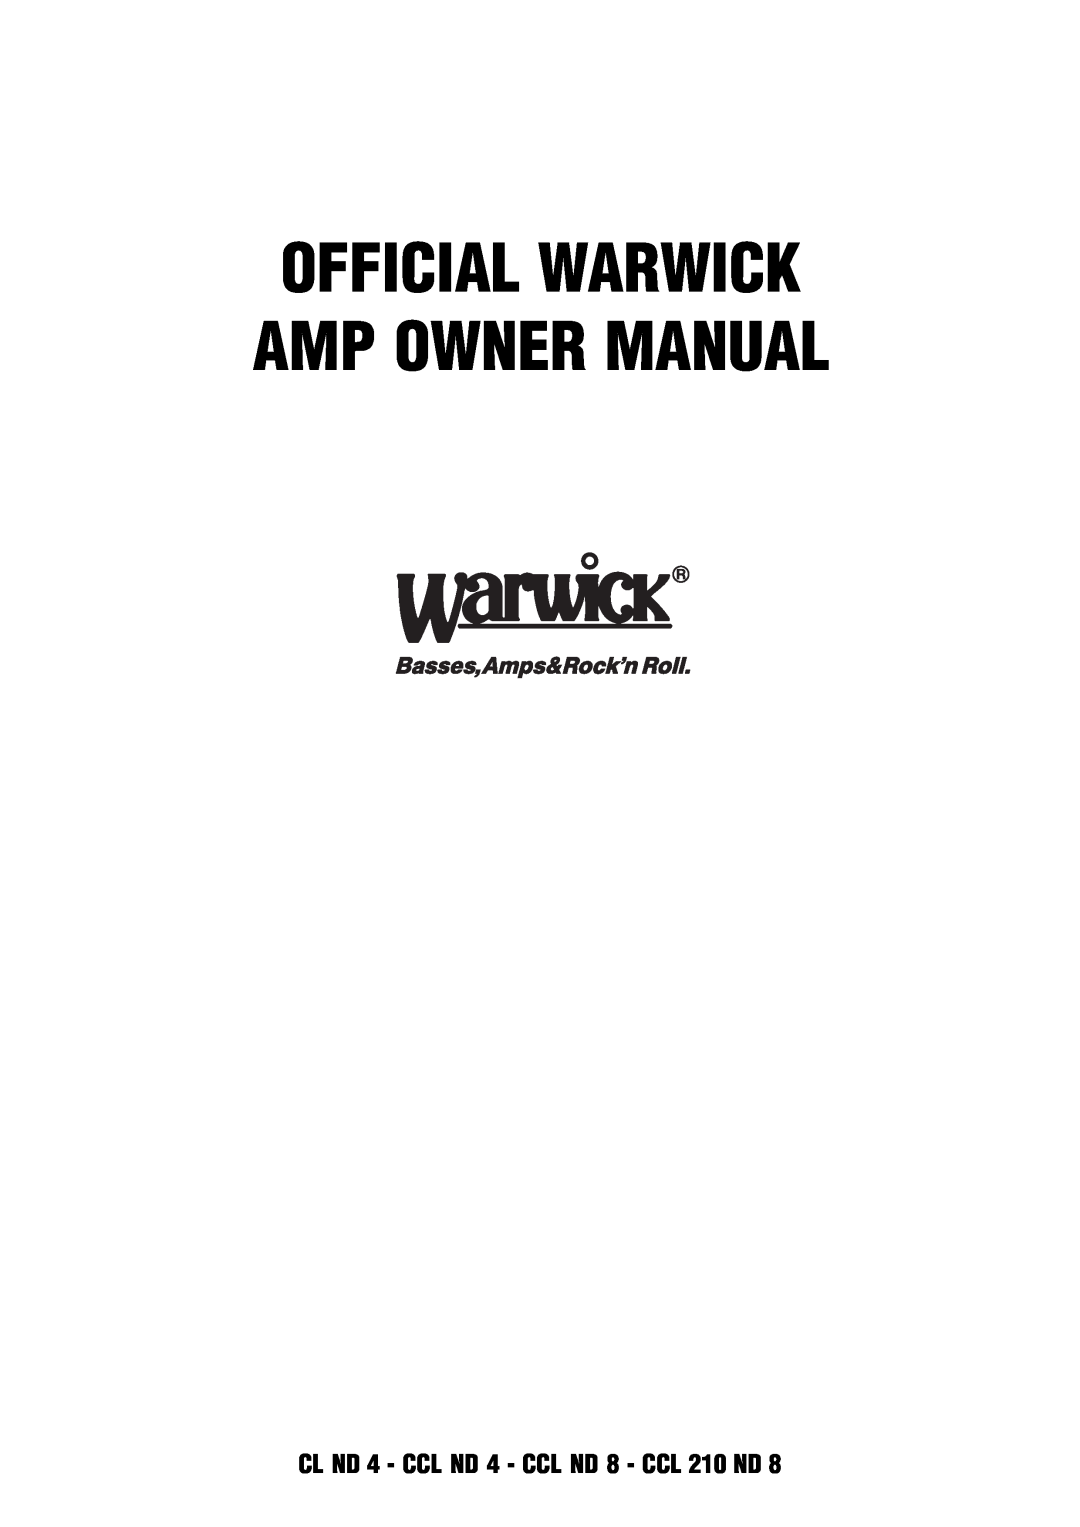 Warwick CL / CCL owner manual CL ND 4 - CCL ND 4 - CCL ND 8 - CCL 210 ND 